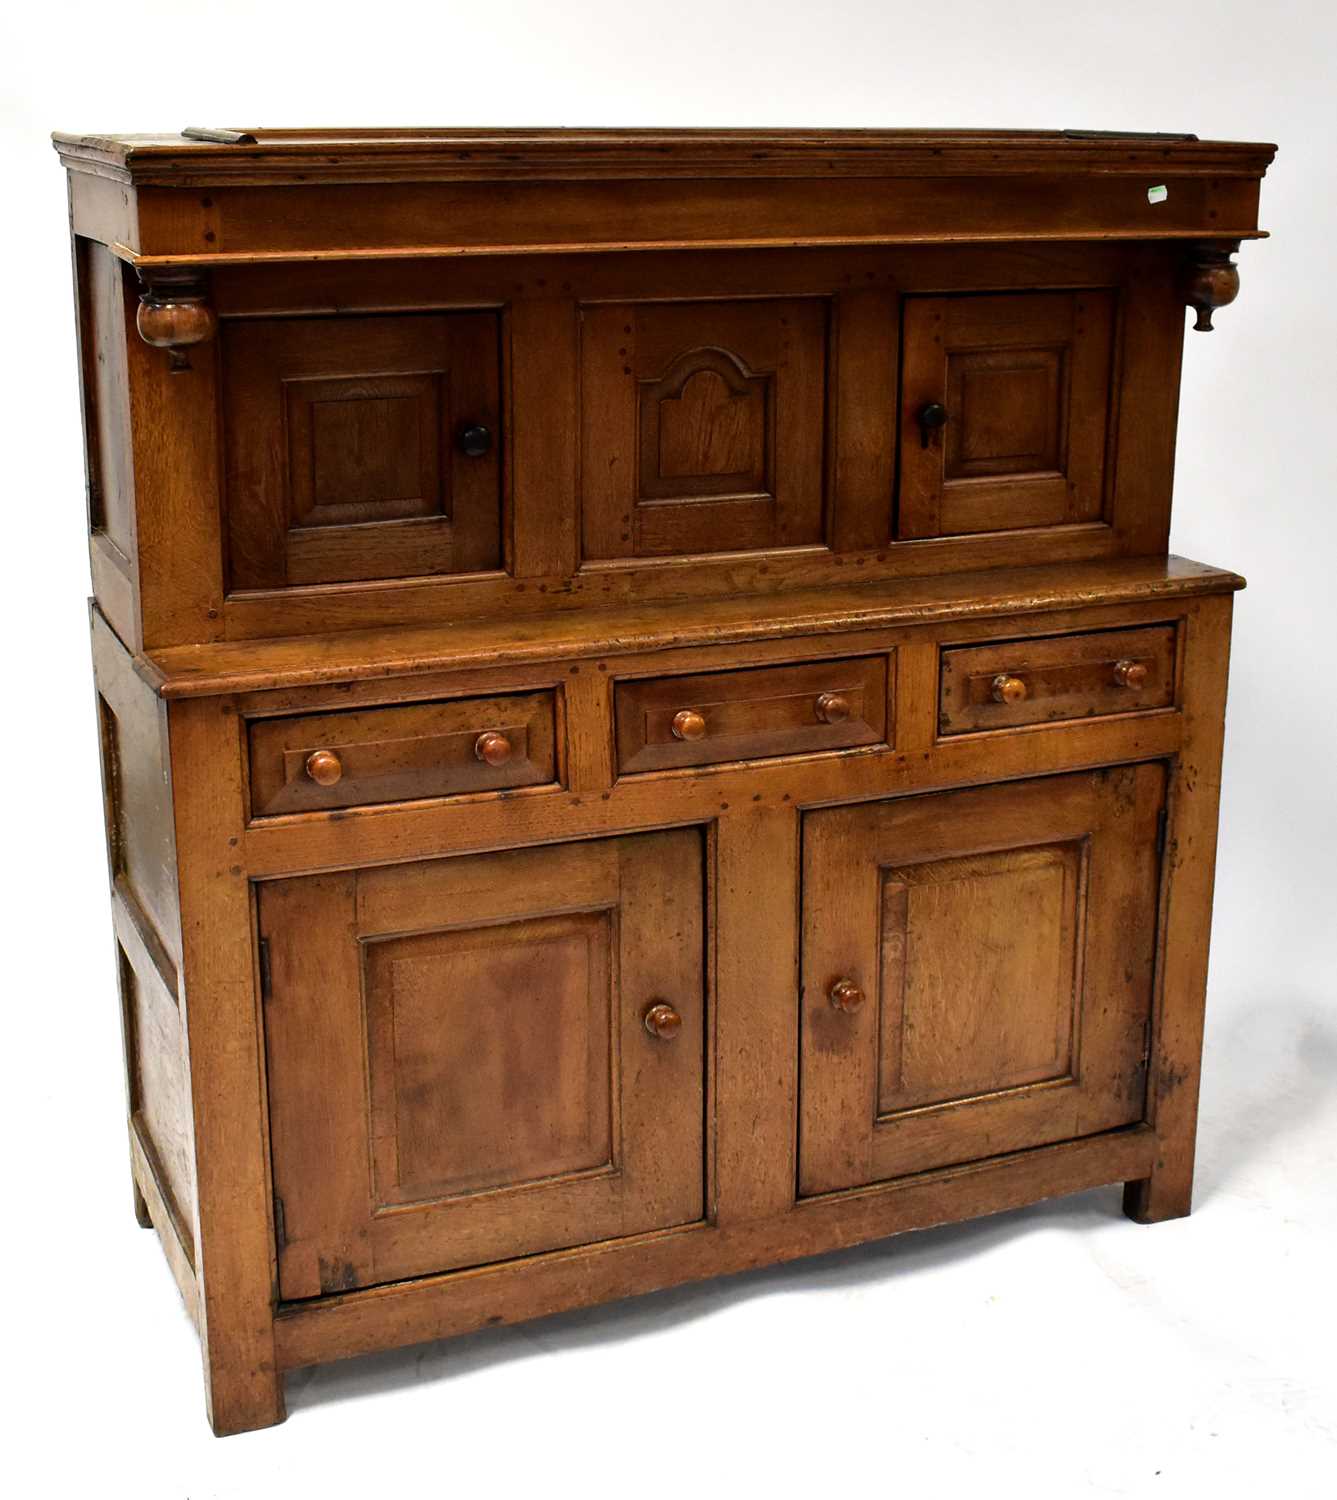 An 18th century oak court cupboard, the upper section with three panelled doors, above a break front